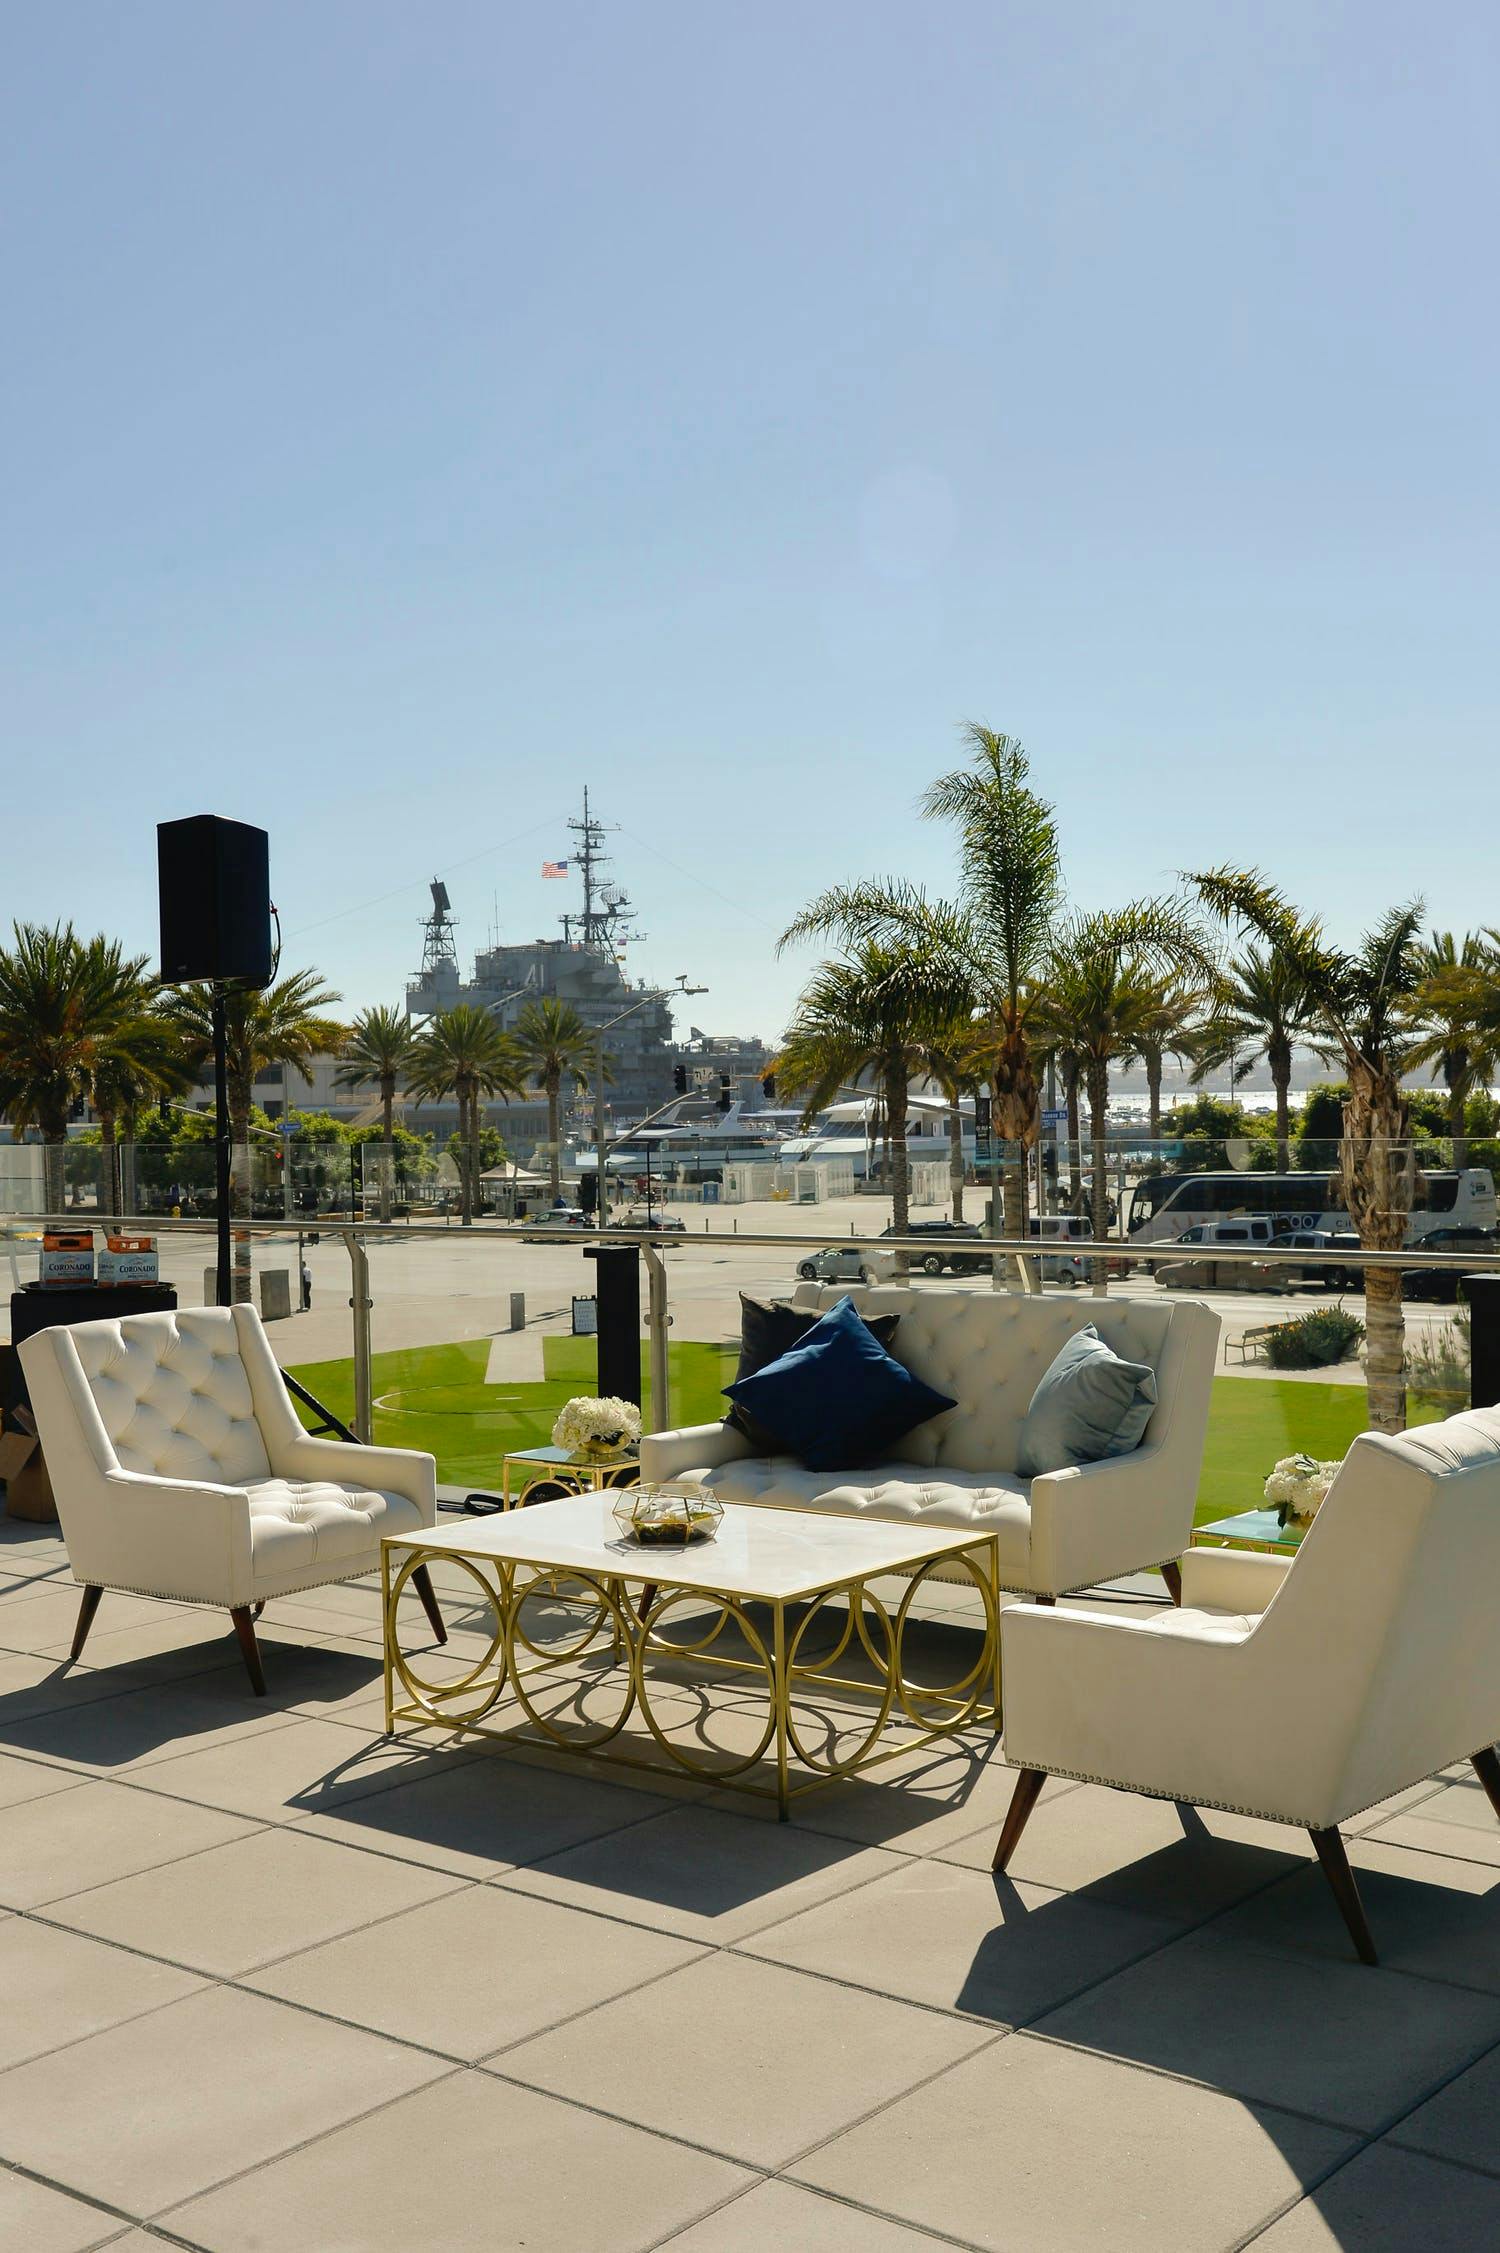 InterContinental San Diego product launch lounge area | PartySlate